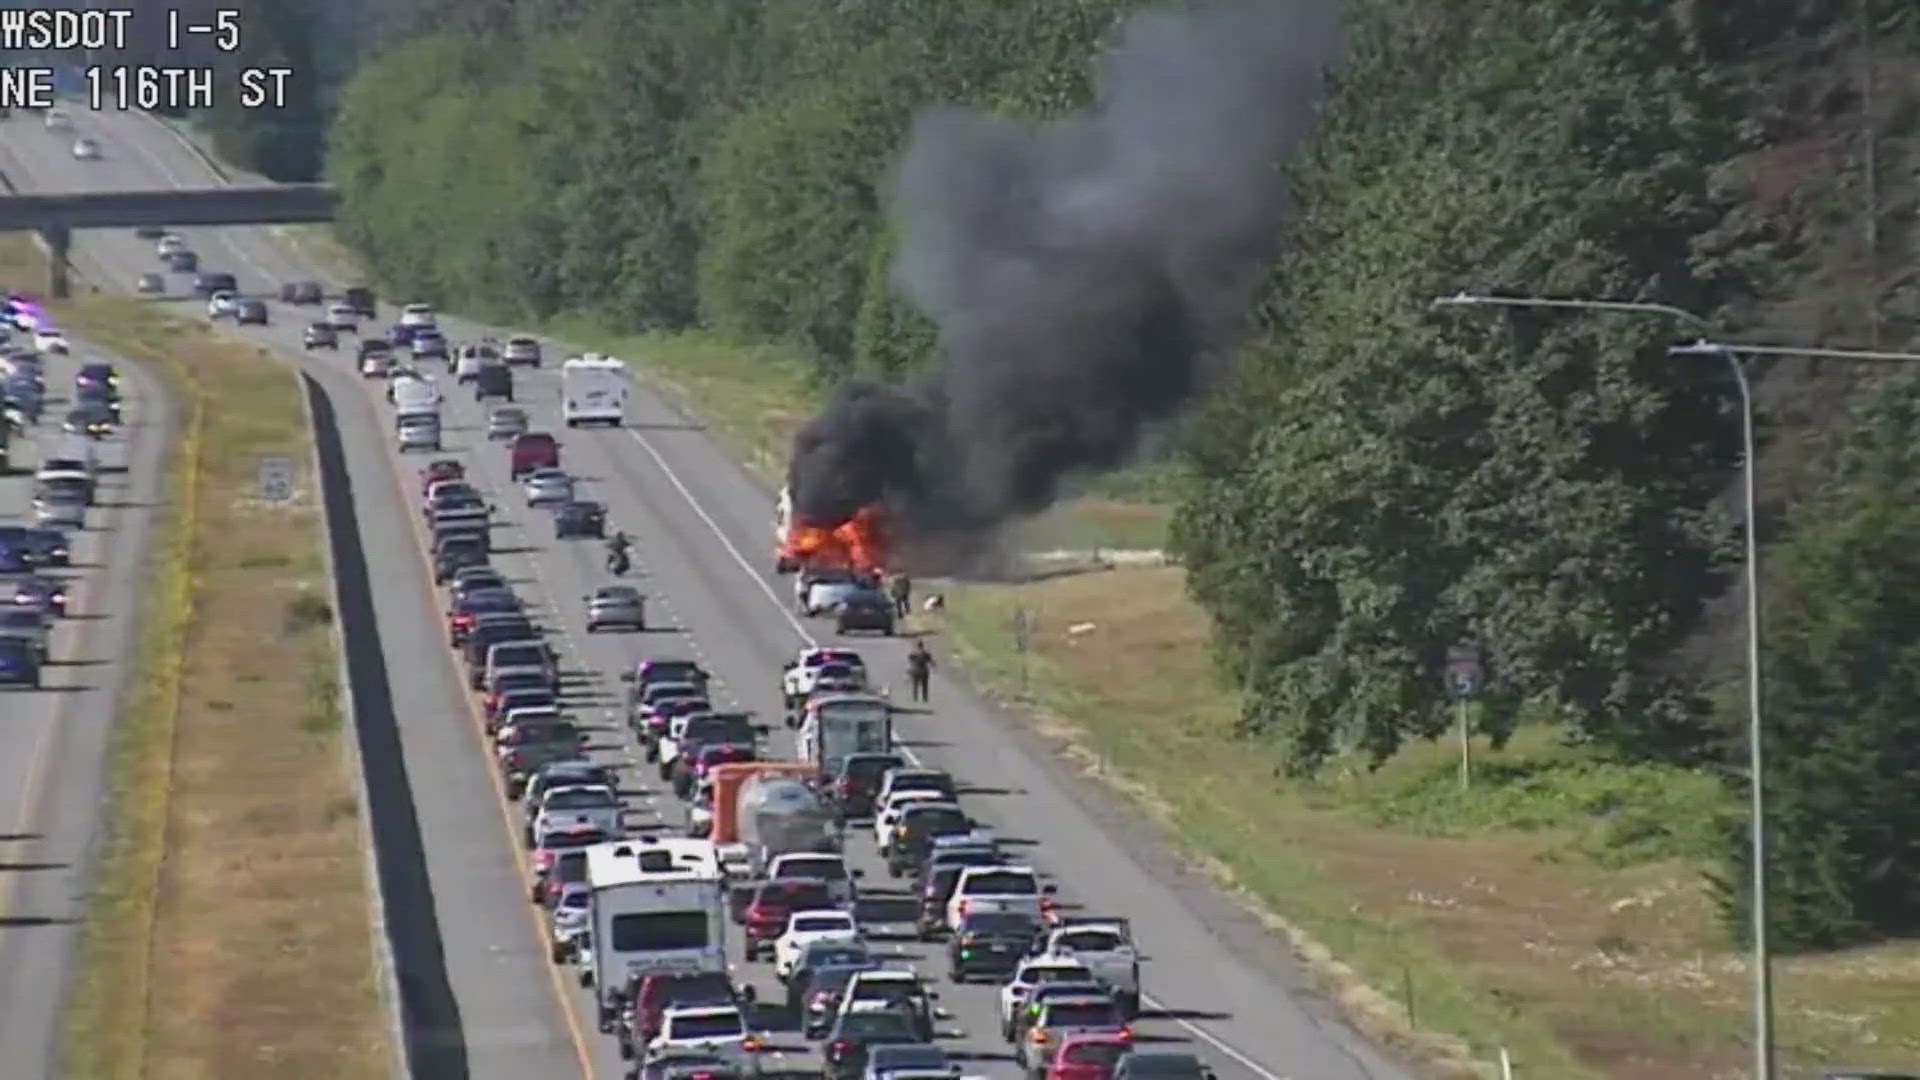 The fire blocked the two right lanes of northbound I-5 the afternoon of July 1.